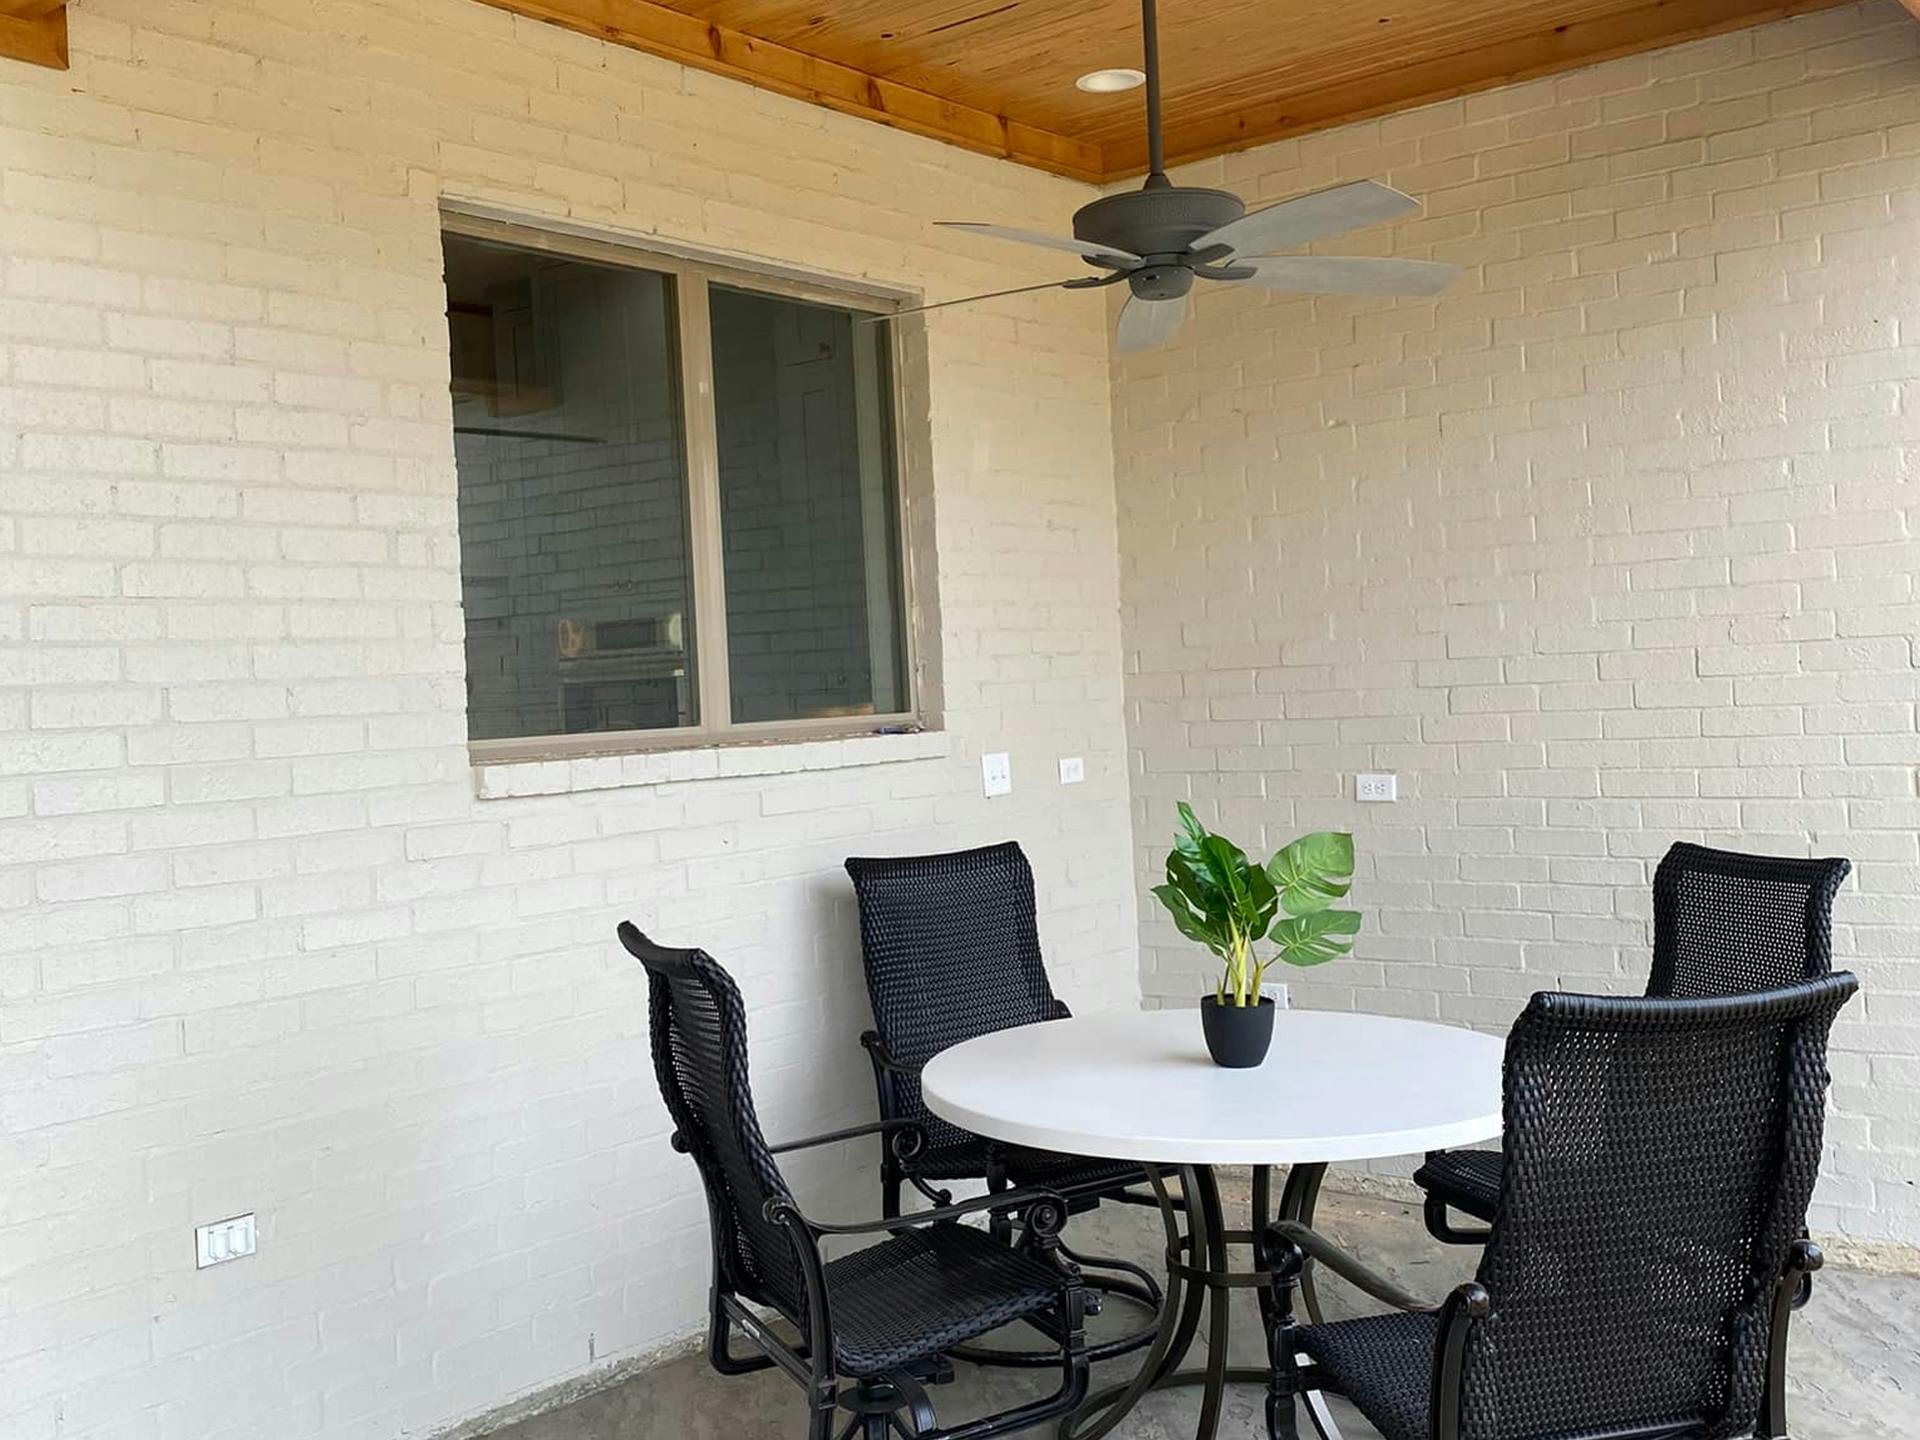 Patio with outdoor dining area and Kichler fan hanging above